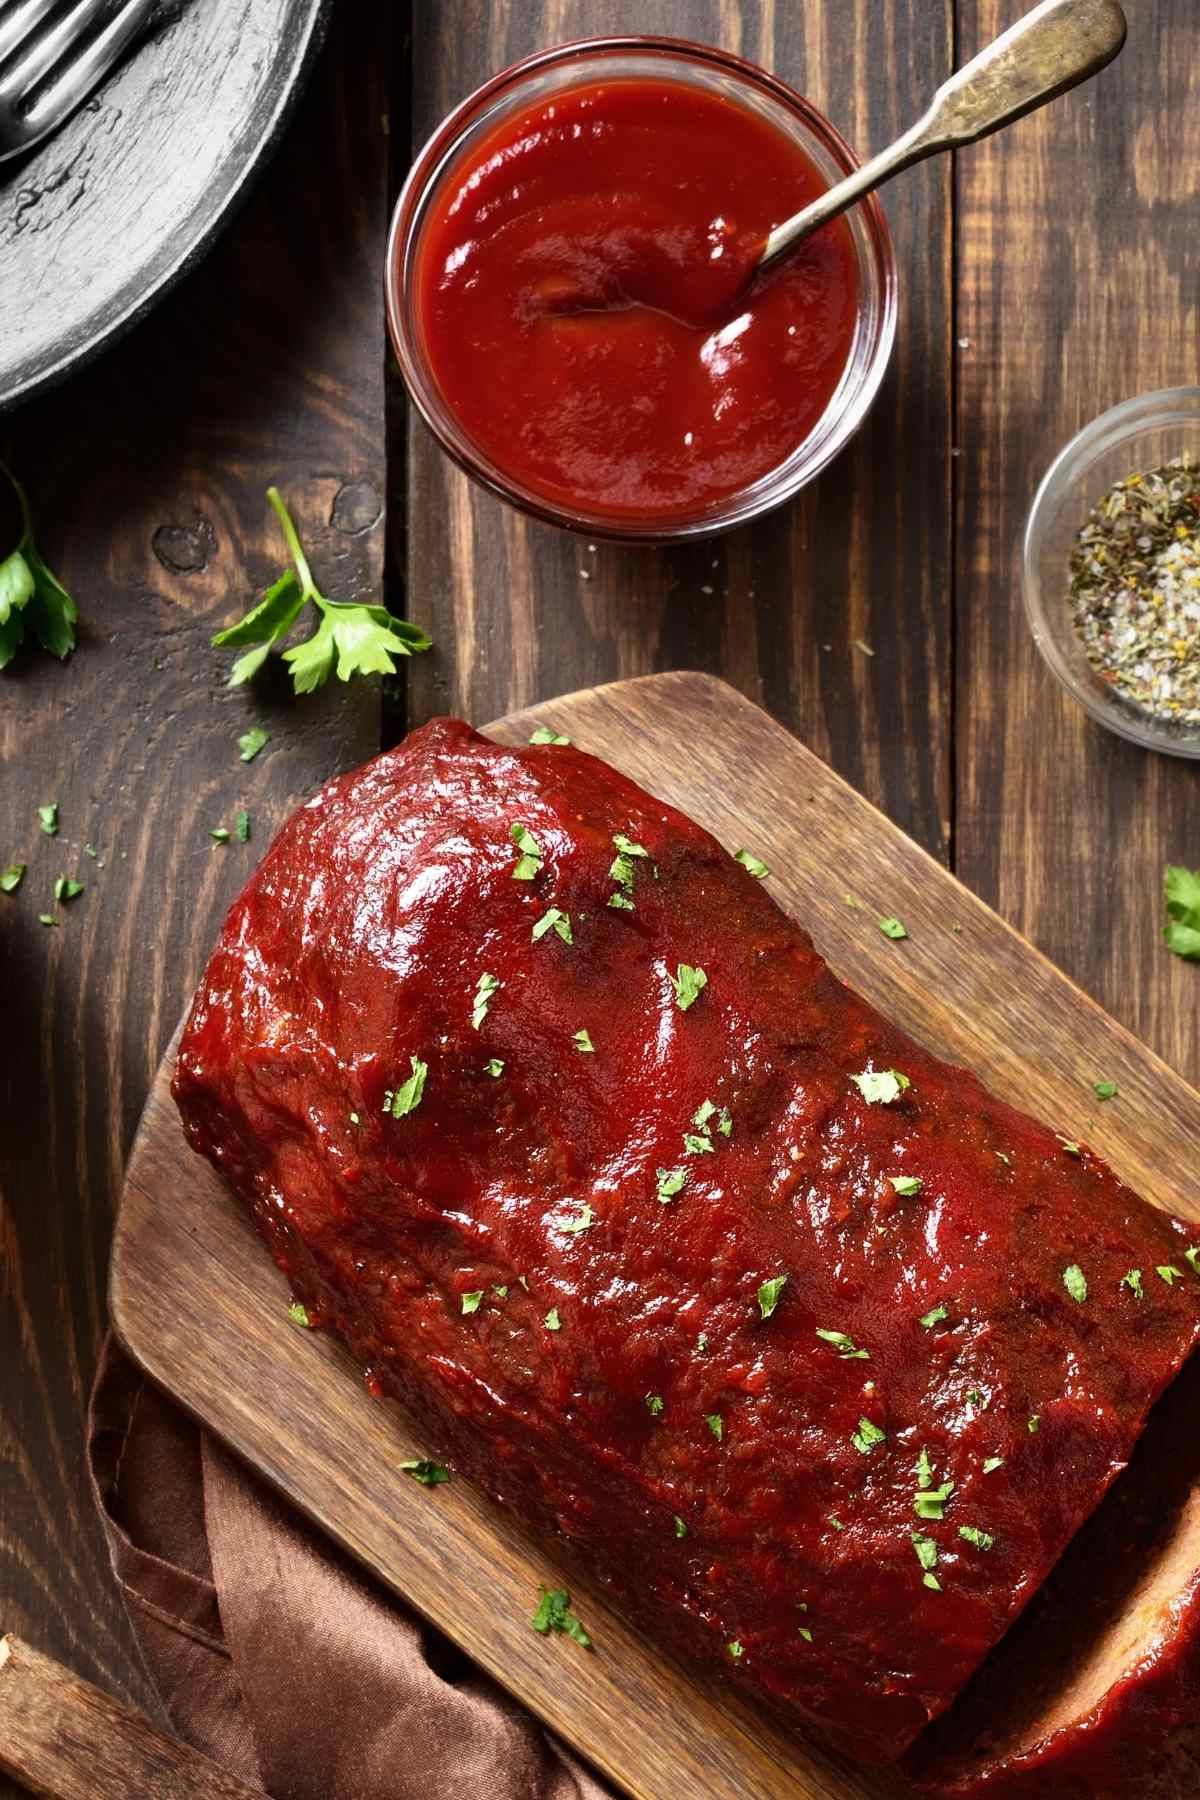 Whether you’re enjoying it fresh out of the oven with mashed potatoes and peas, or biting into a thick and hearty sandwich, just about everyone enjoys the savory taste of meatloaf. For many, the best meatloaf is topped with a sweet and sticky glaze or a sauce.